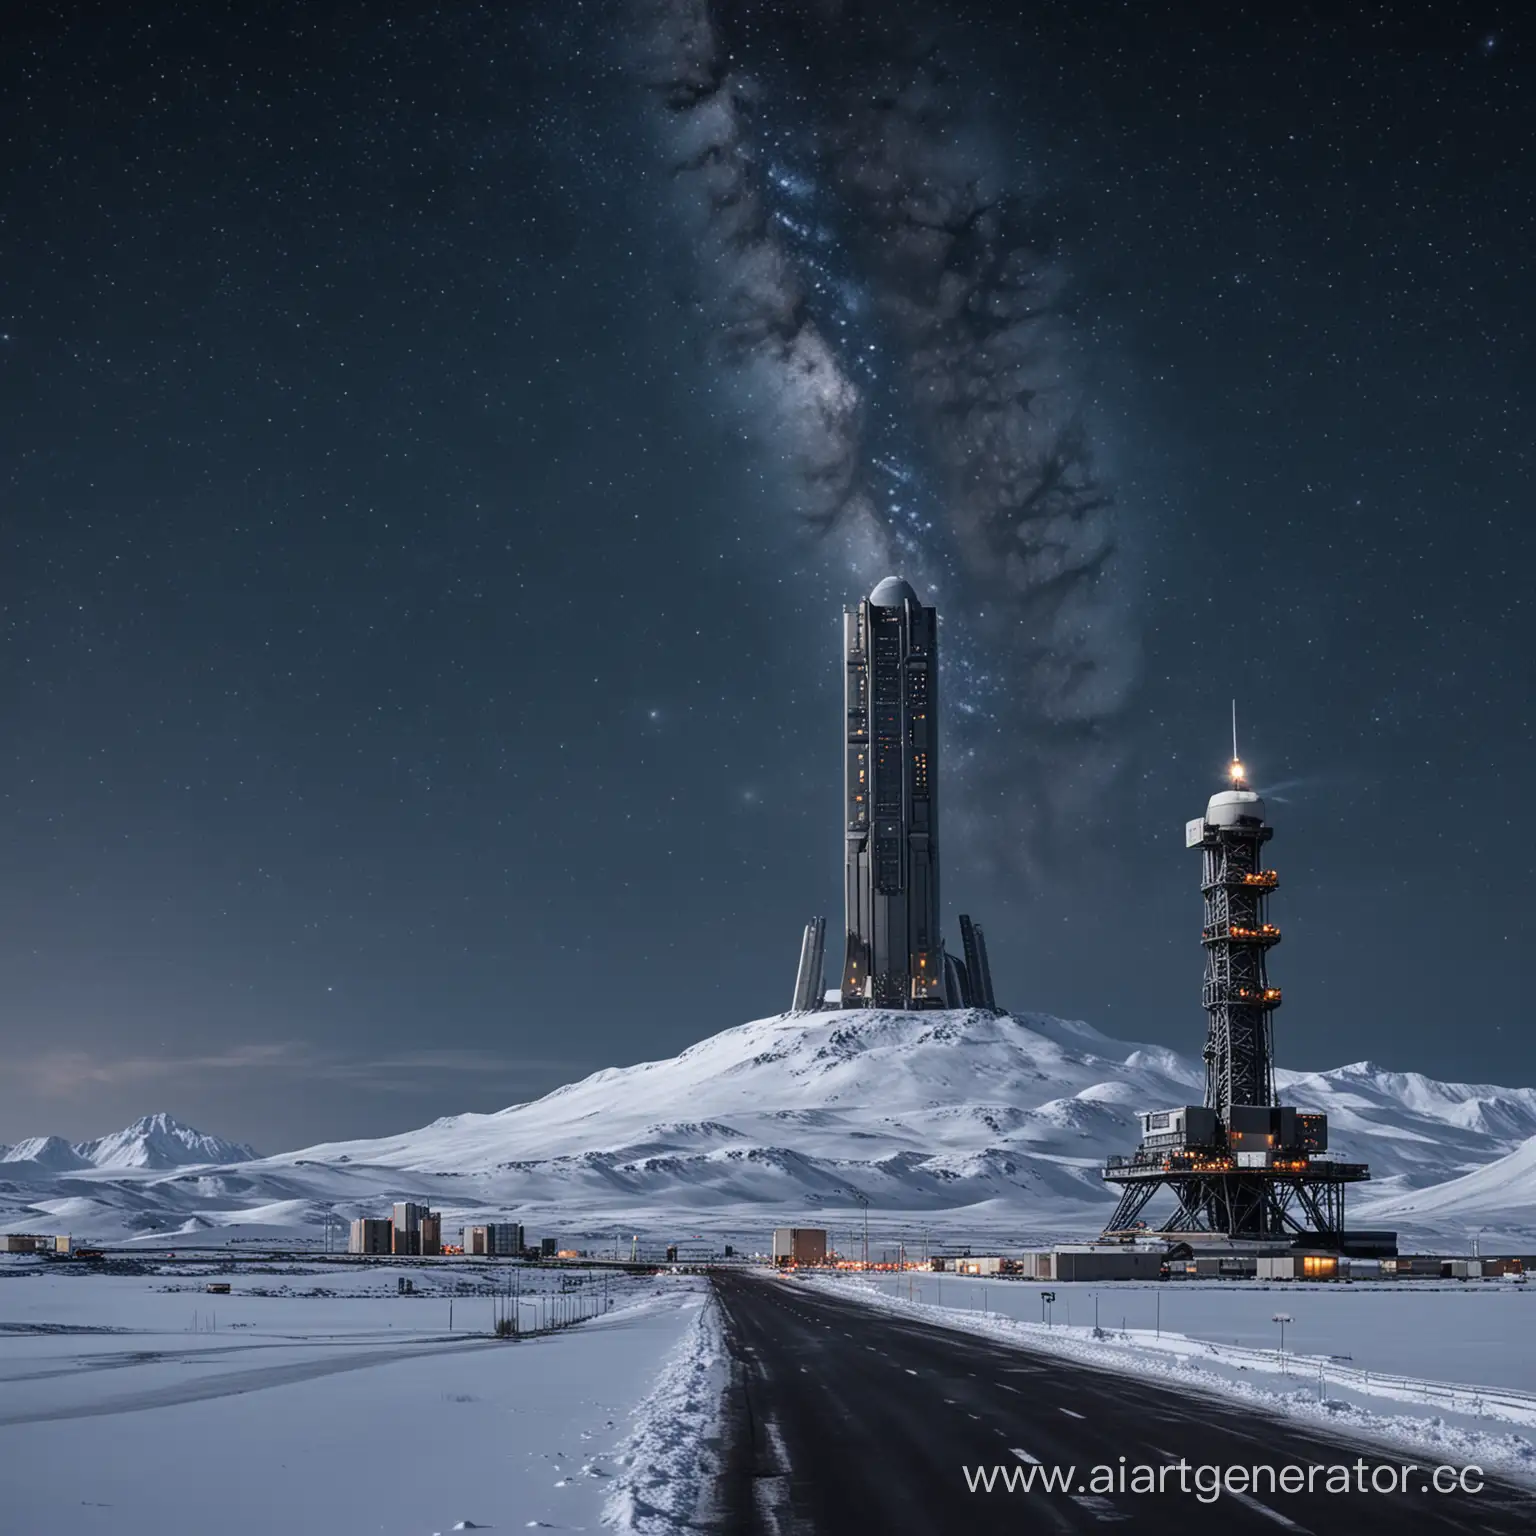 MilitarySpace-HighRise-Research-Facility-Mountain-Spaceport-at-Night